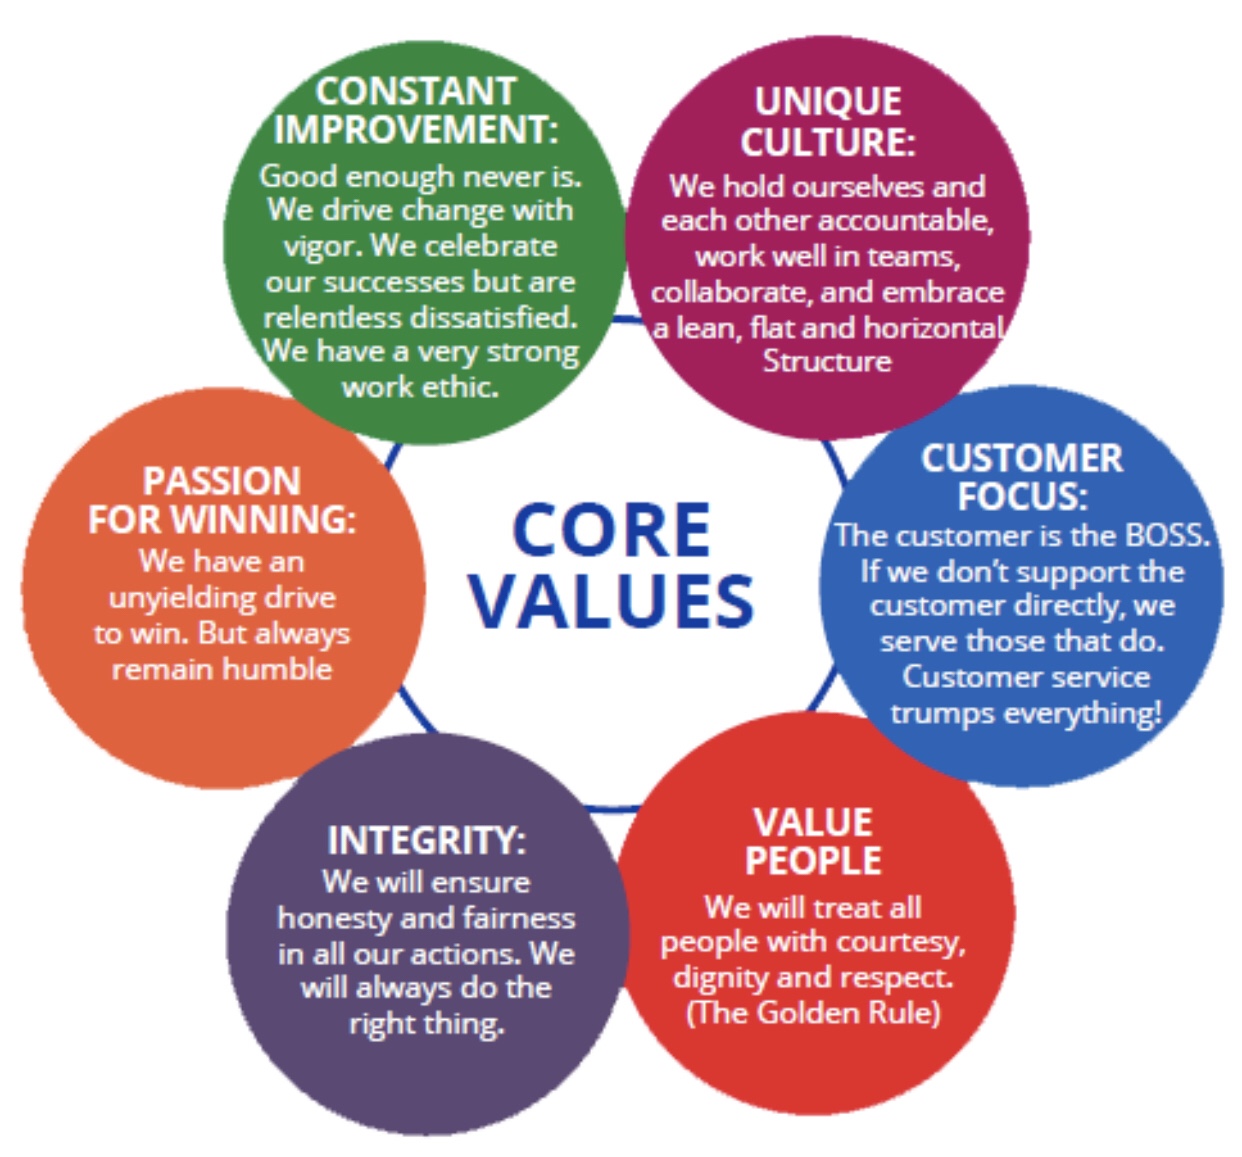 Values yes values. Core values. Culture and values. Company values. Values of people.